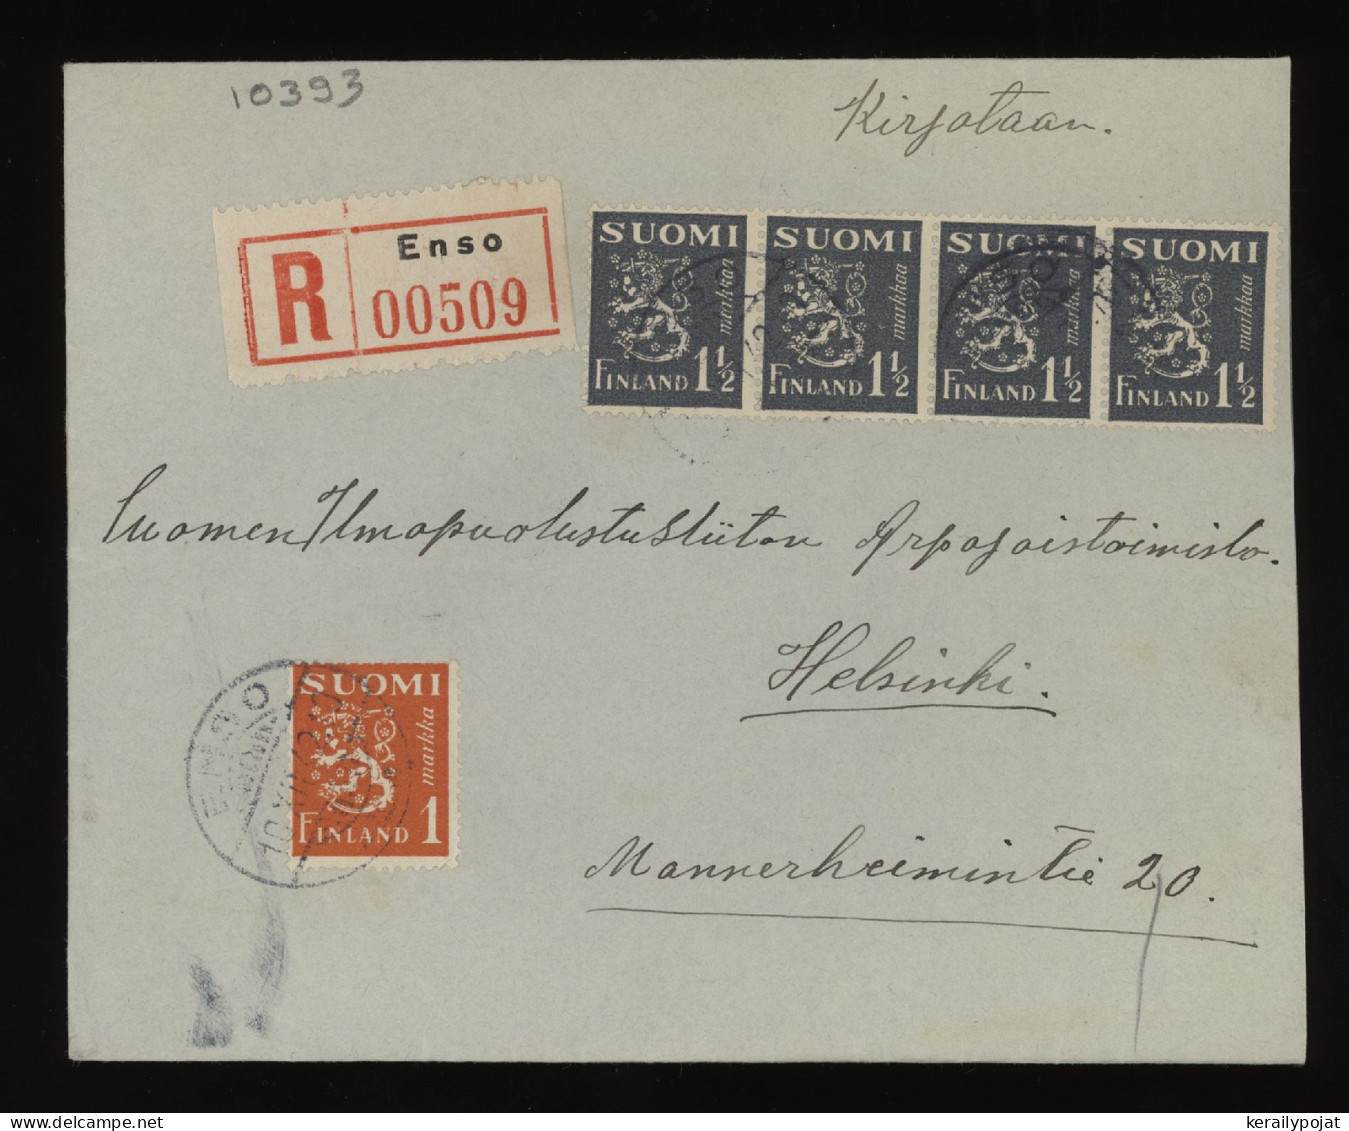 Finland 1942 Enso Registered Cover__(10393) - Lettres & Documents